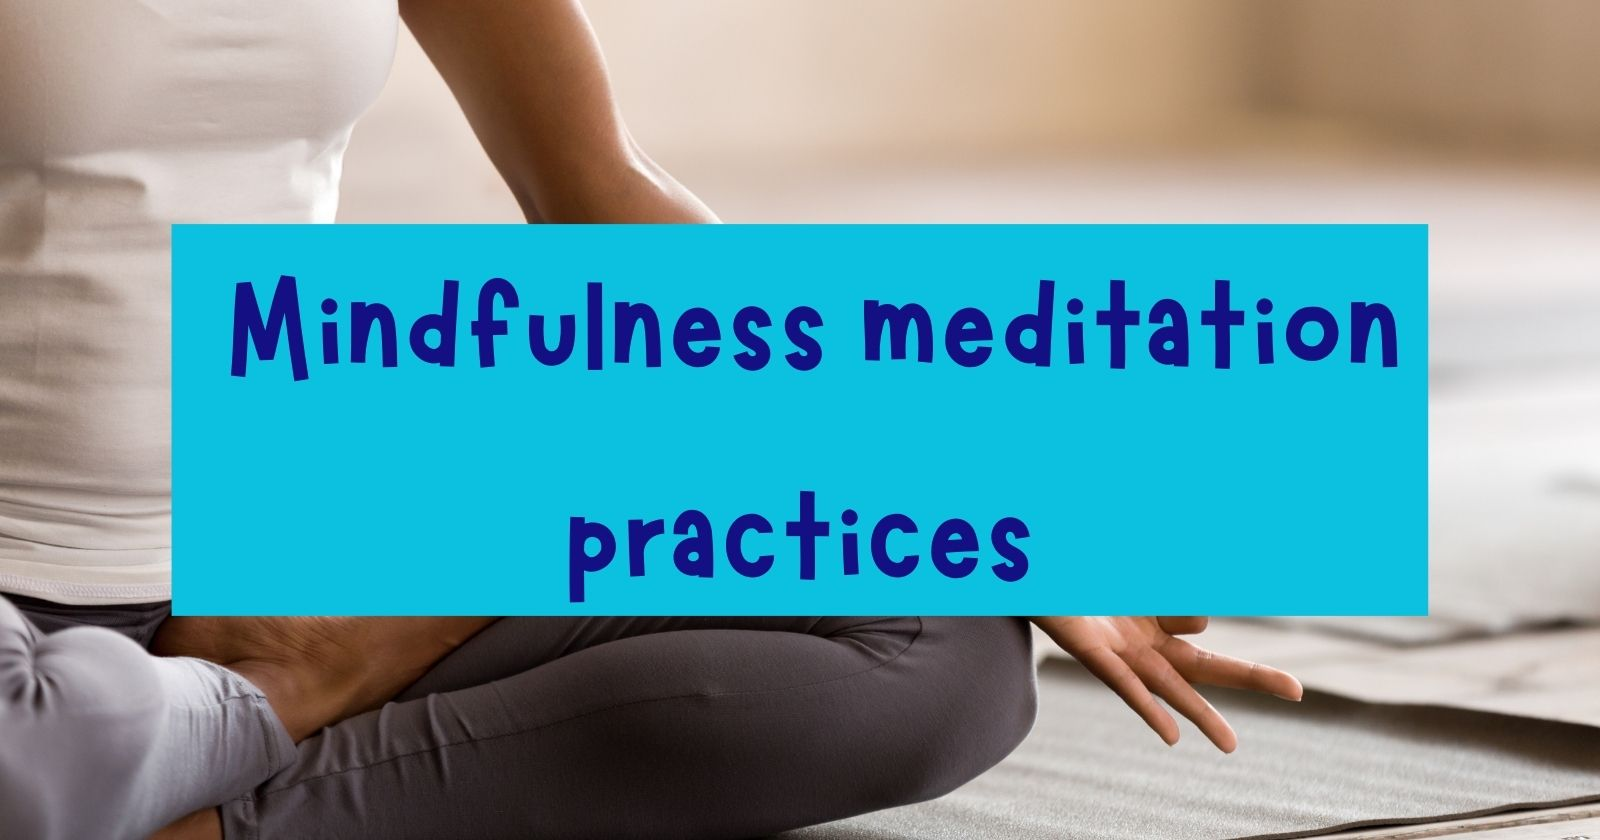 trauma sensitive mindfulness practices
Girl doing yoga with a text box "Mindfulness mediation practices"